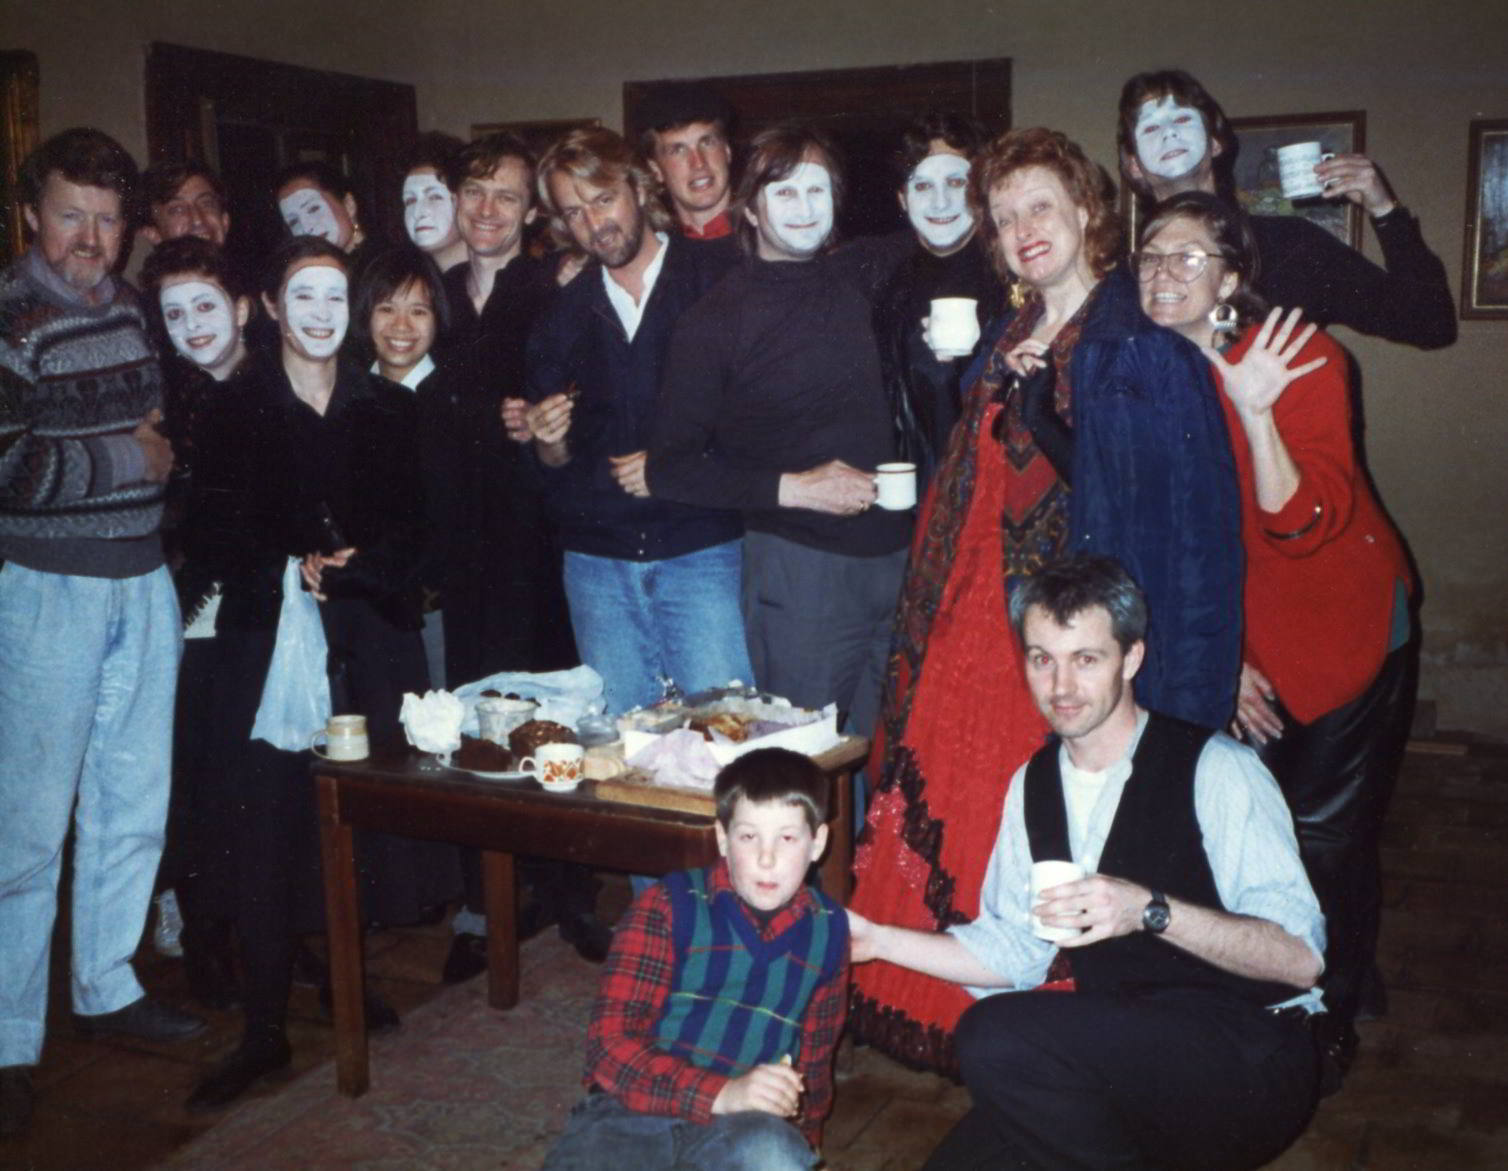 Elision and Handspan group photo of performing company, including musicians in white face make up